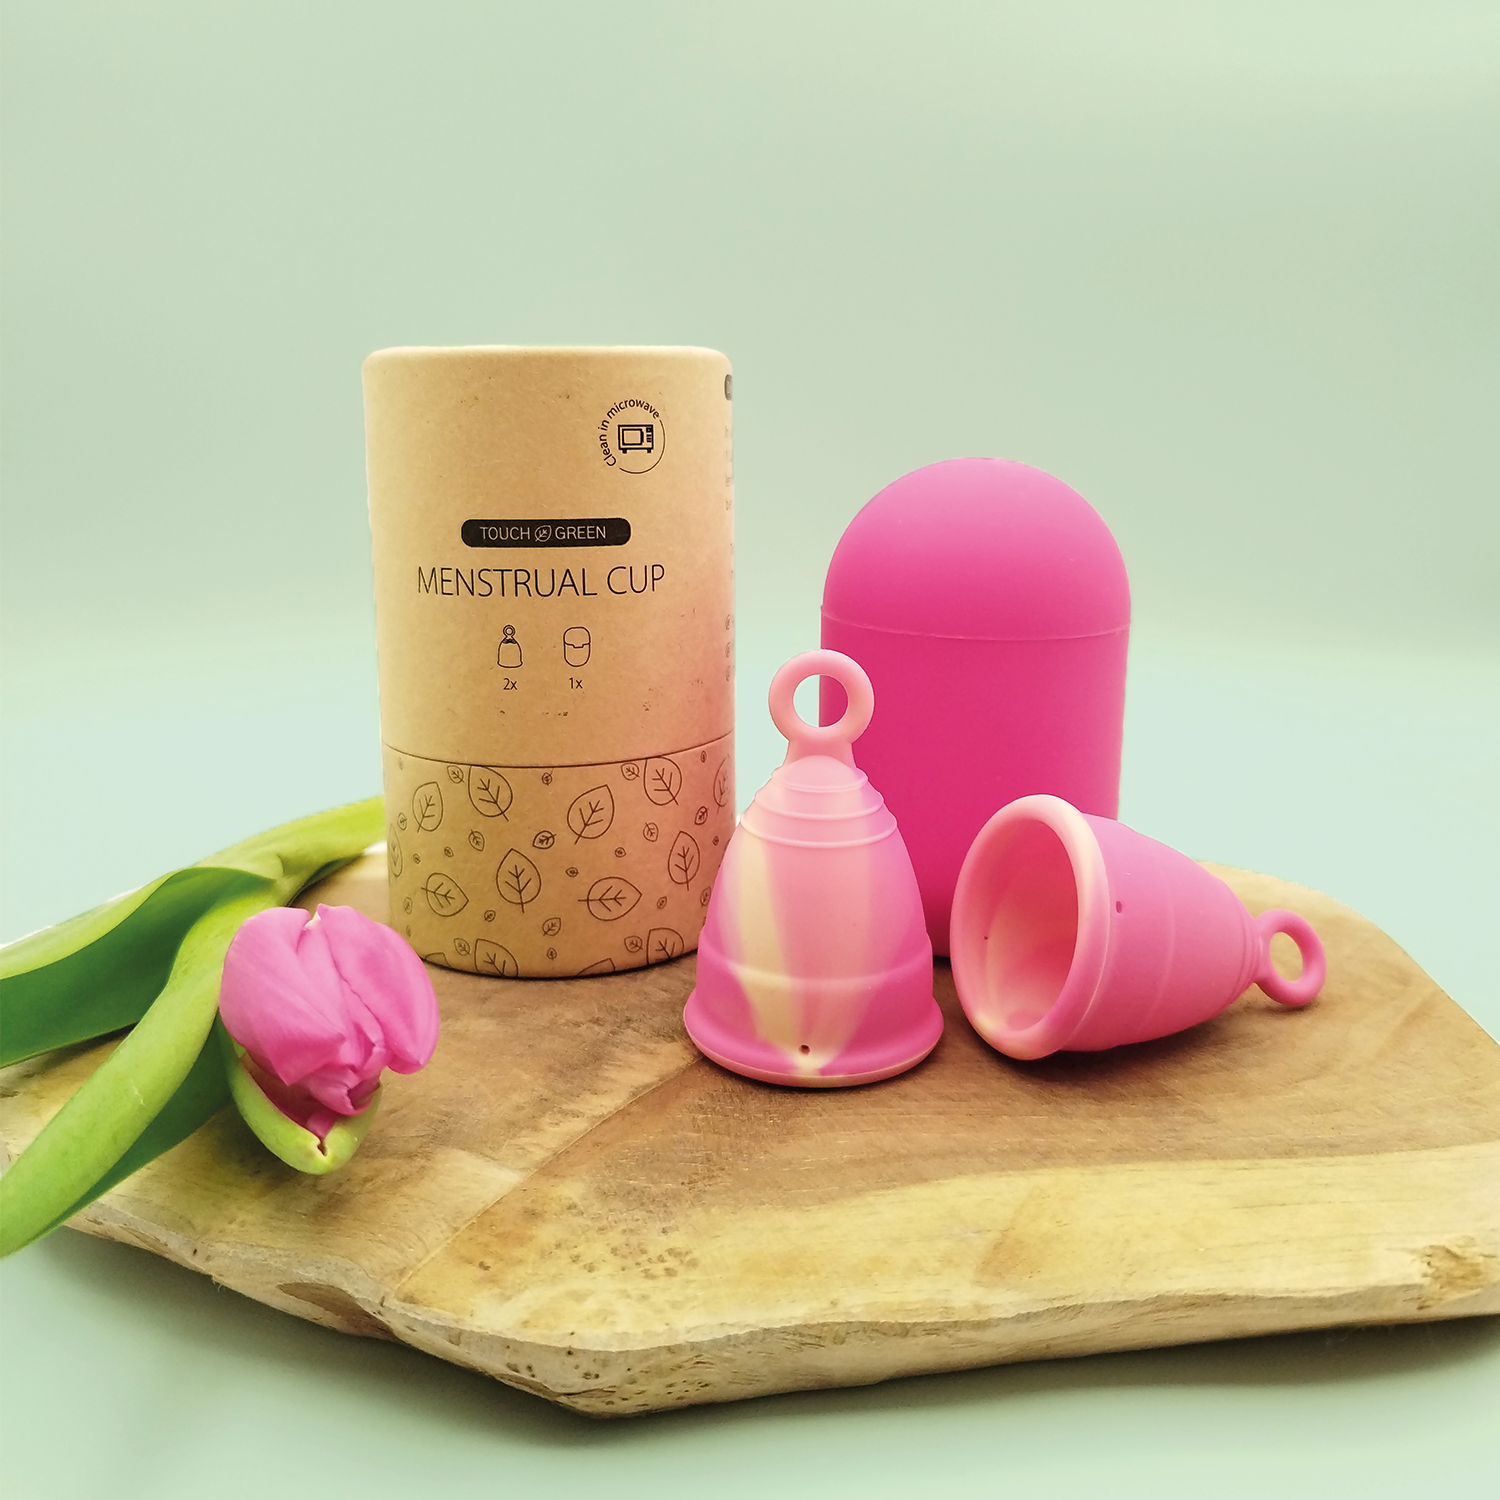 S'moo Menstrual Cup – The S'moo Co